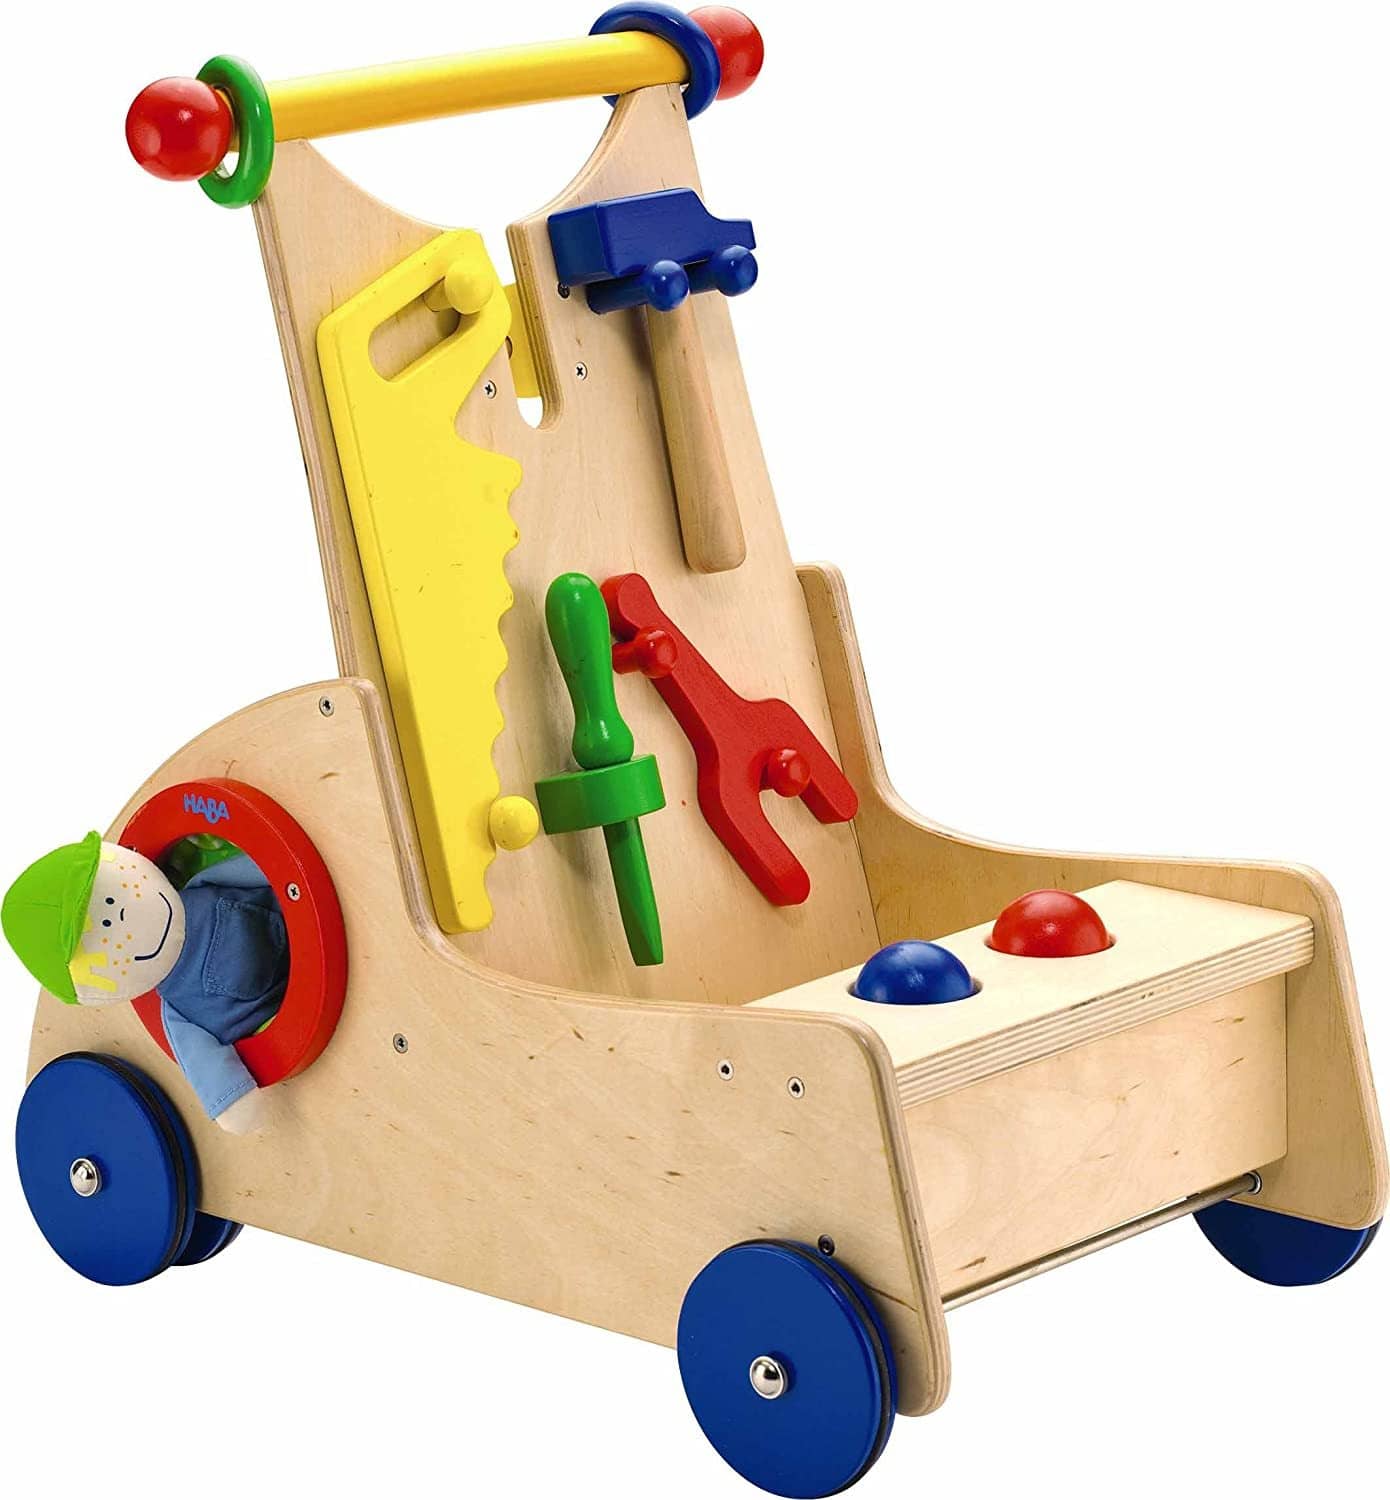 Walk Along Tool Cart - Wooden Activity Push Toy For Ages 10 Months & Up-Kidding Around NYC